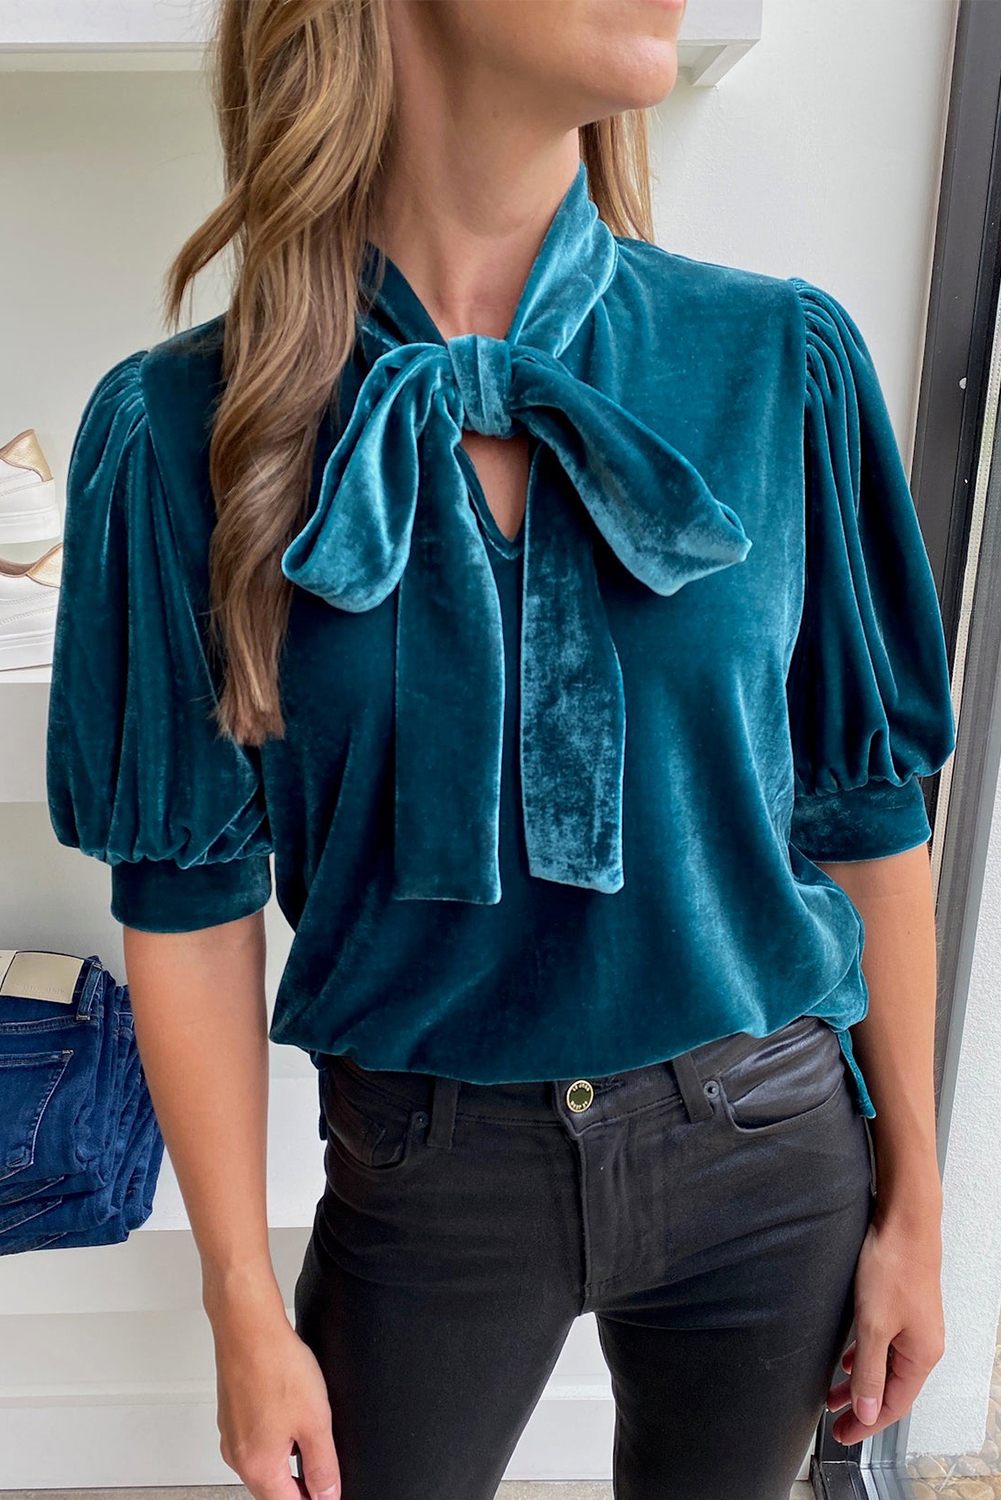 Shewin Wholesale Customized Peacock Blue Velvet Bow TIE Neck Ruched Short Sleeve Blouse